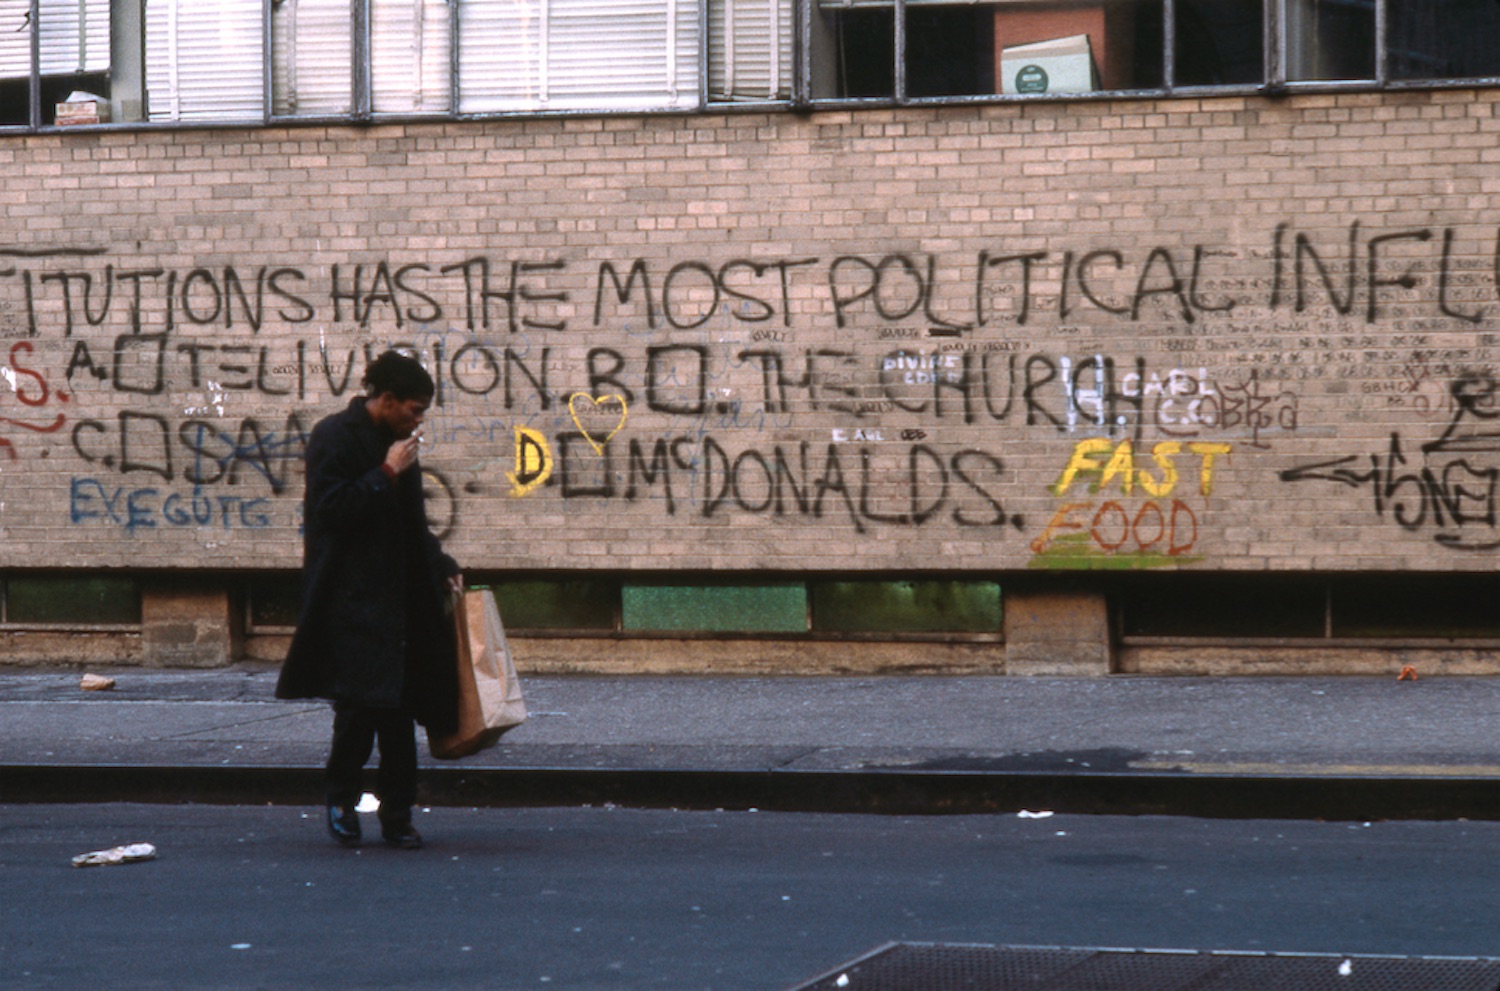 THESE INSTITUTIONS HAS THE MOST POLITICAL INFLUENCE A.TELEVISION B. THE CHURCH C. SAMO D. MC DONALDS’, Downtown 81, Edo Bertoglio ©New York Beat Film